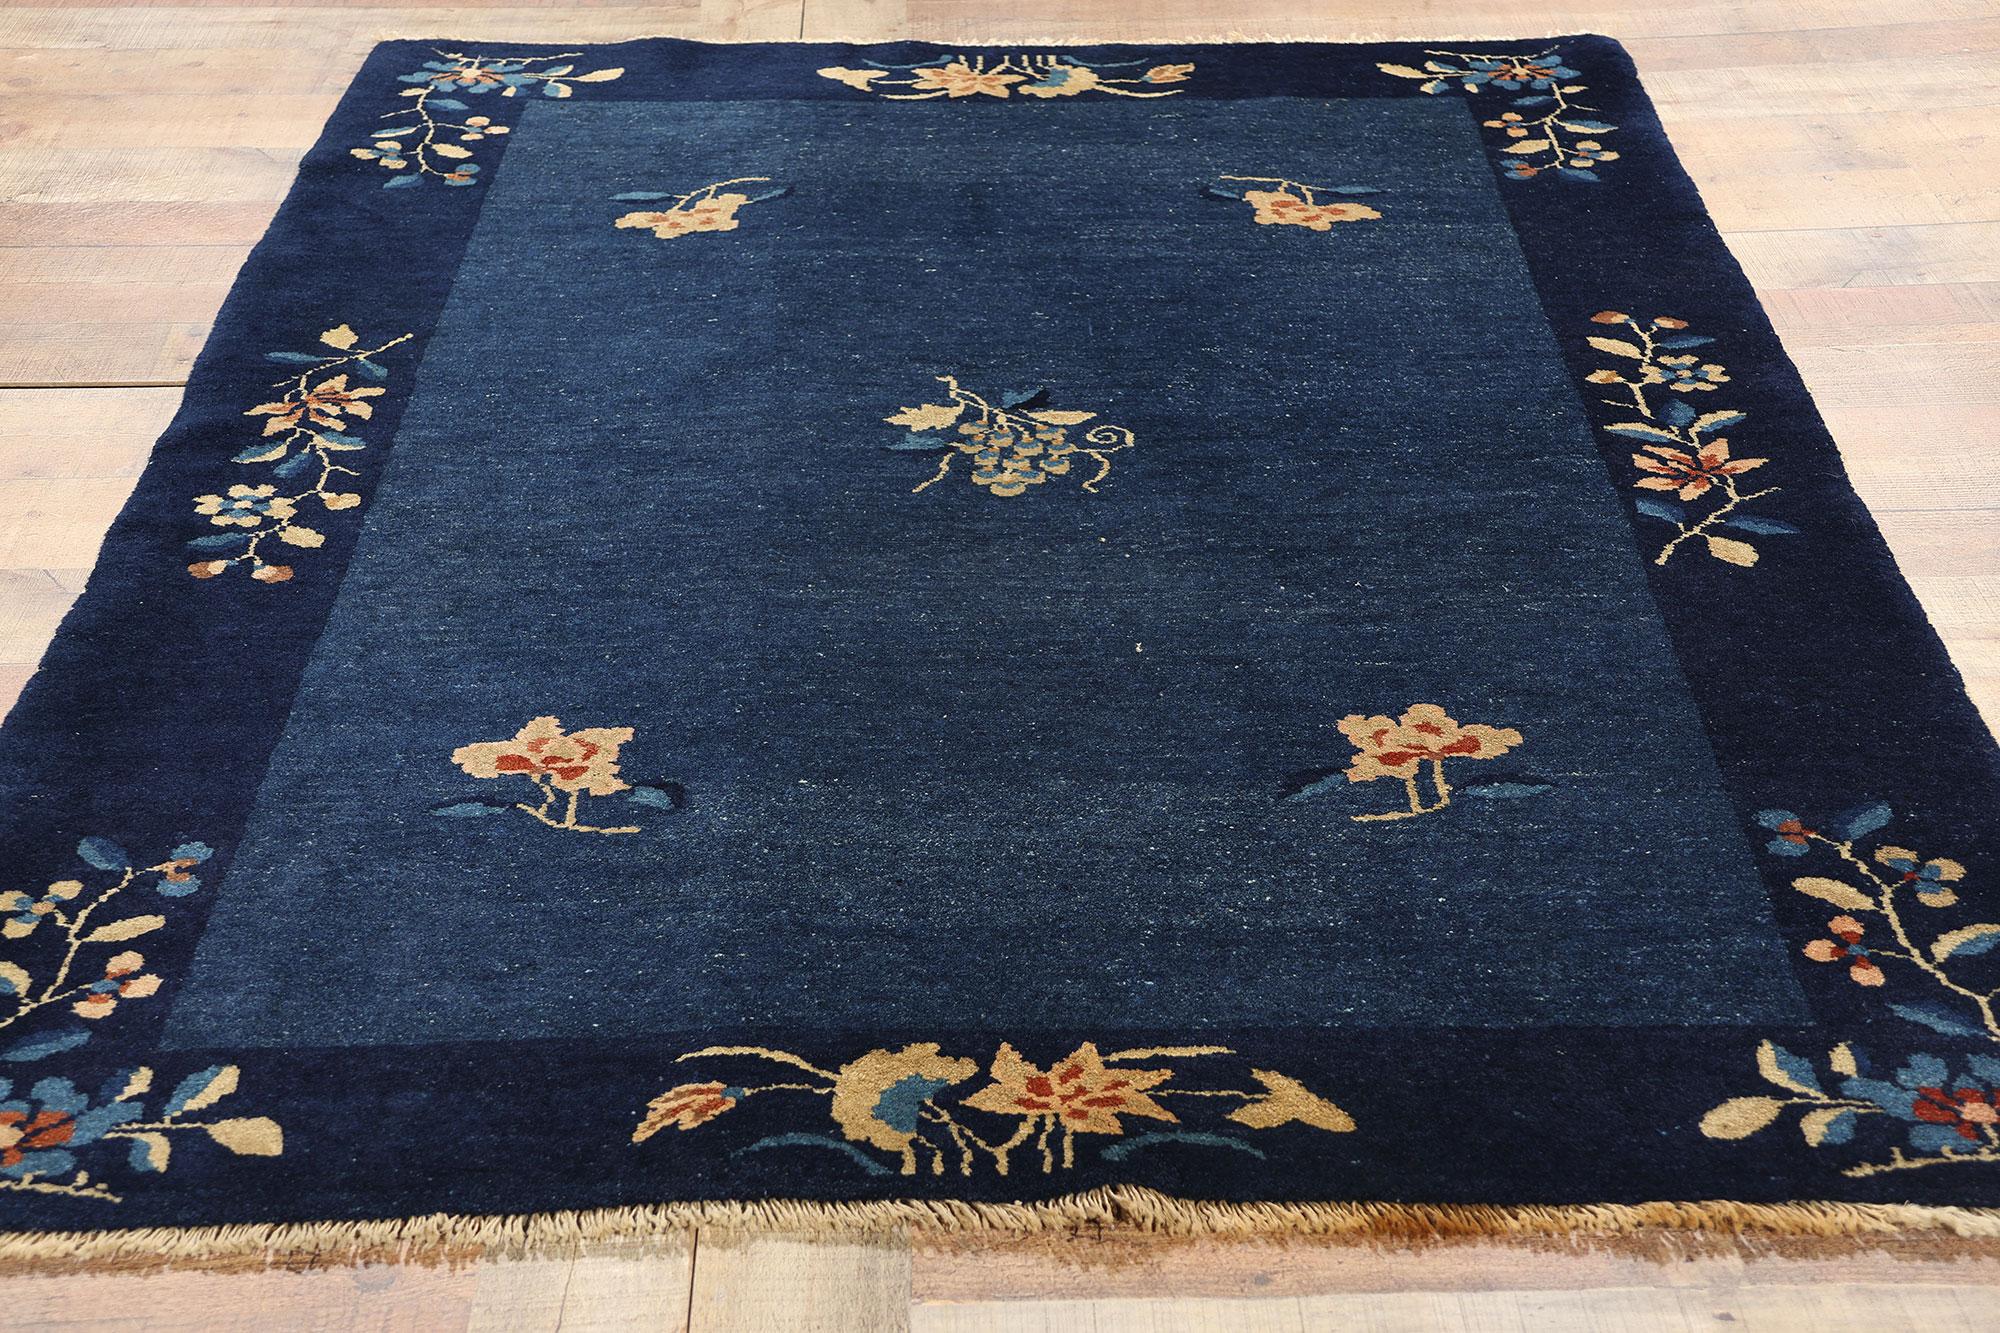 Antique Blue Chinese Peking Rug, Chinoiserie Chic Meets Regal Decadence For Sale 1